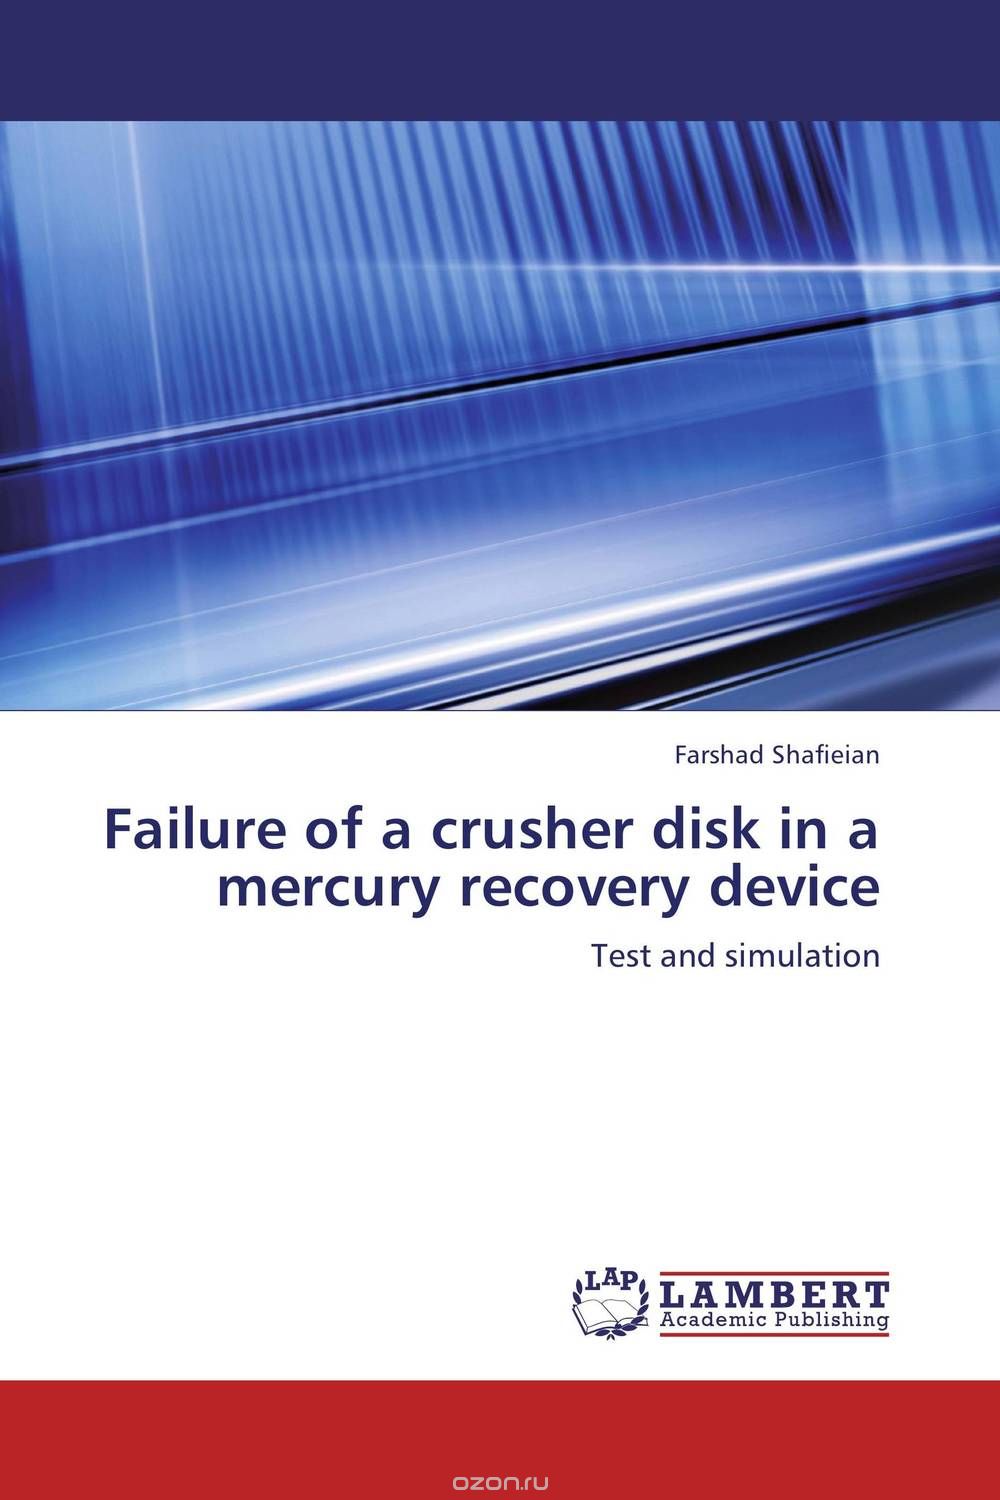 Скачать книгу "Failure of a crusher disk in a mercury recovery device"